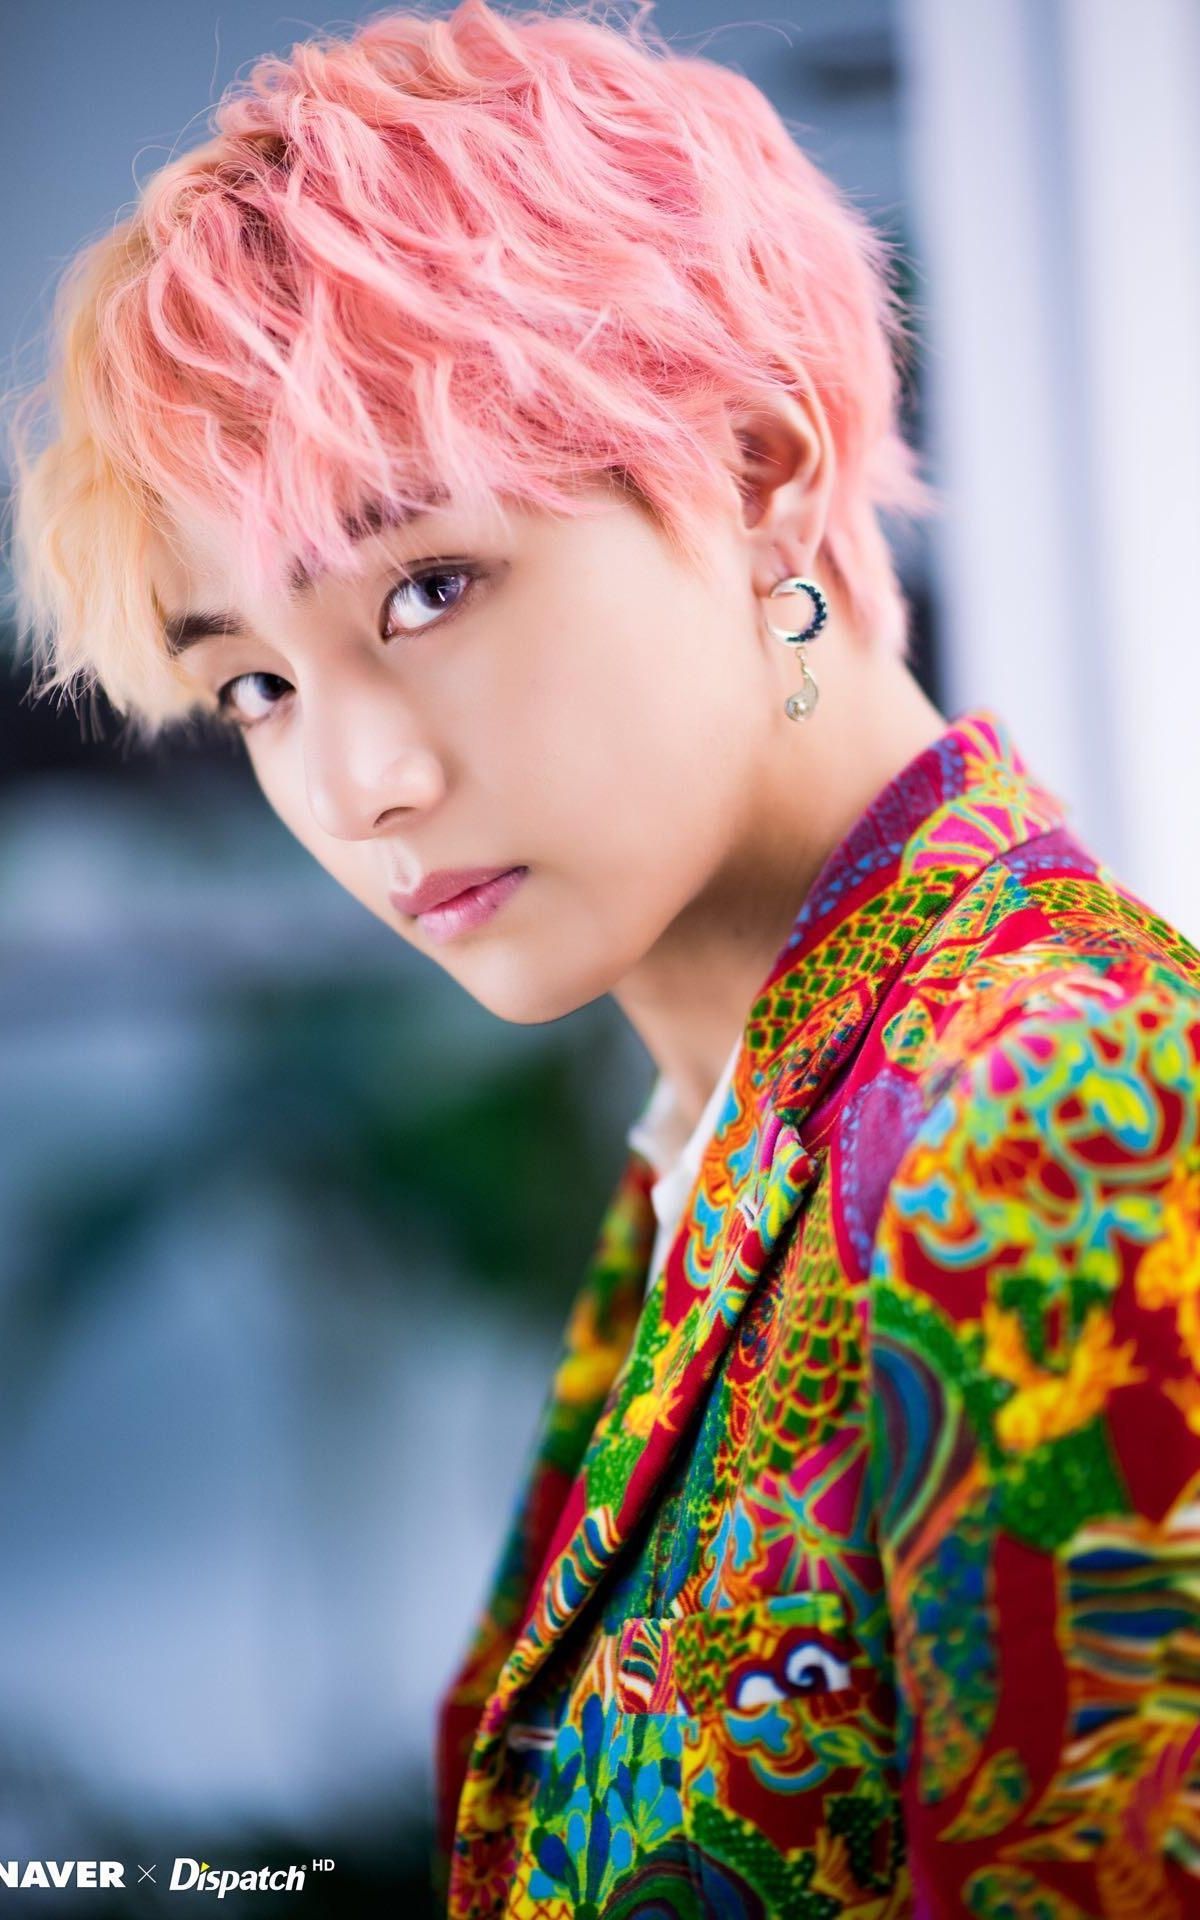 Free download V BTS image Taehyung HD wallpaper and background